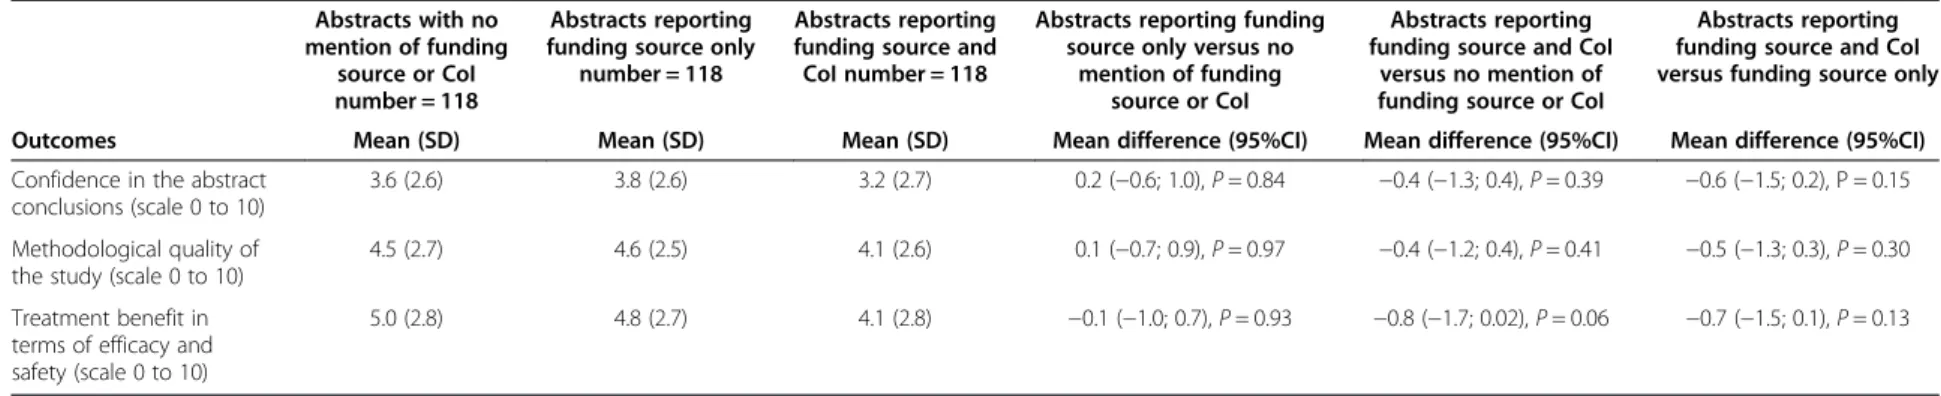 Table 3 Comparison of GPs ’ confidence in the abstract ’ s conclusions, methodological quality and treatment benefit Abstracts with no mention of funding source or CoI number = 118 Abstracts reporting funding source only